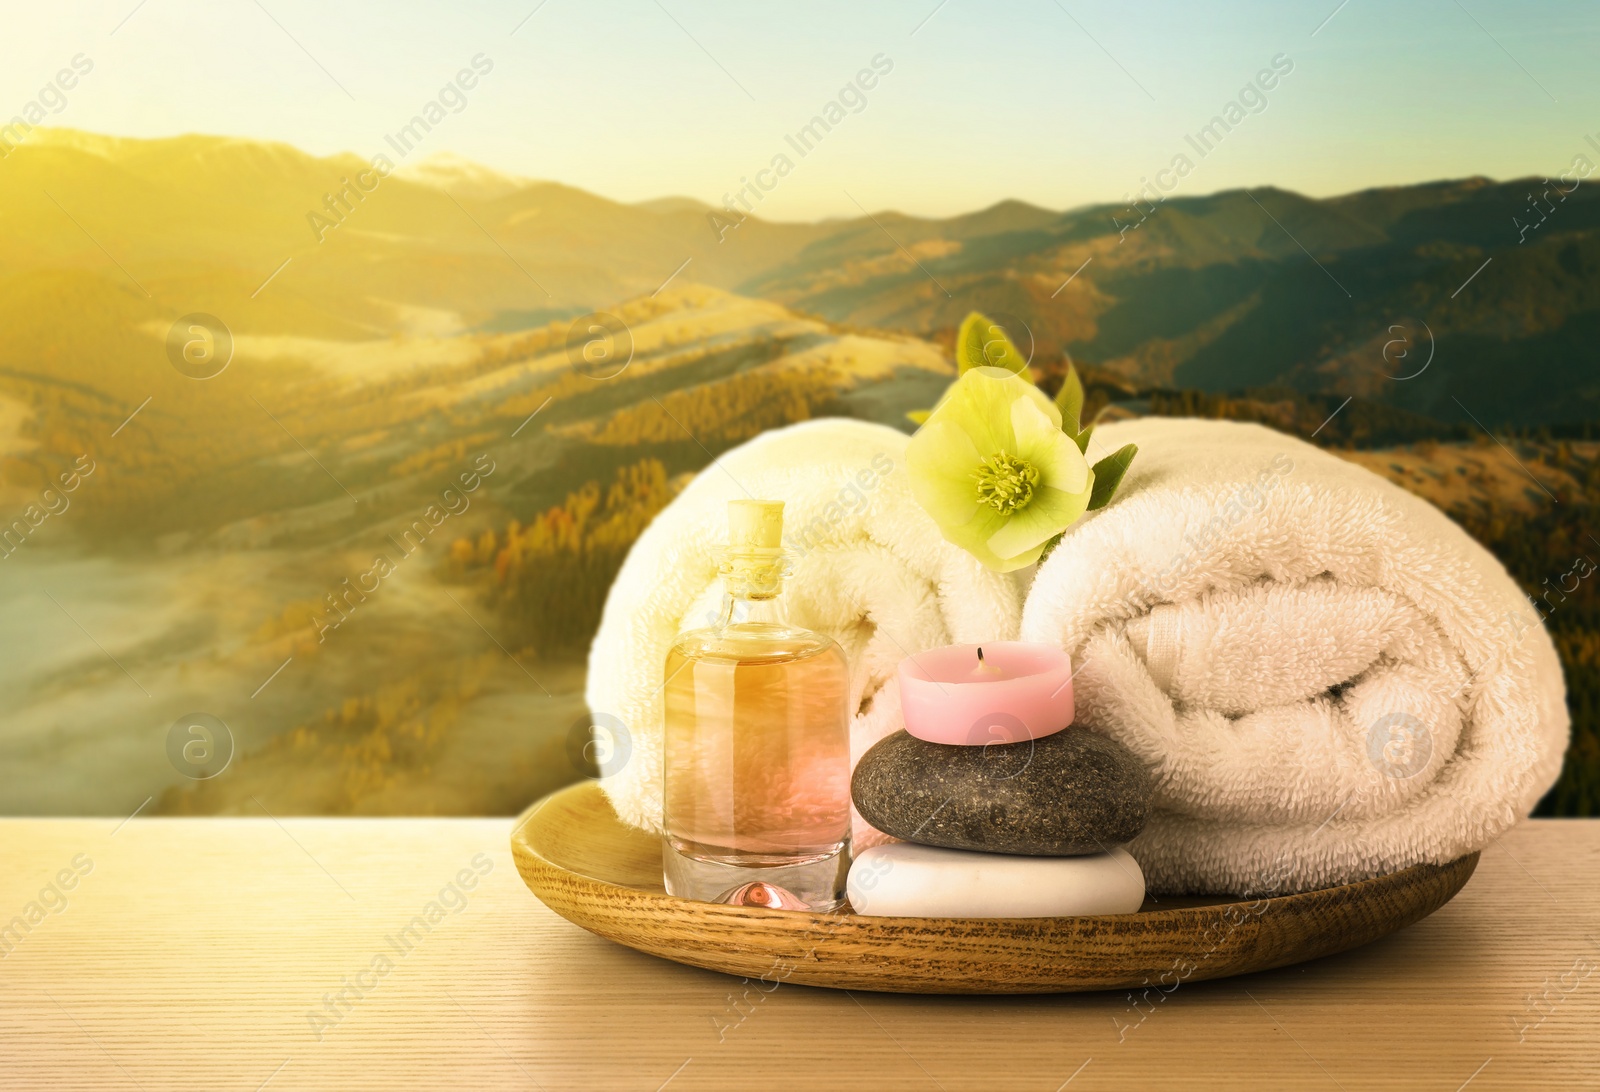 Image of Tray with spa supplies on wooden table against beautiful mountain landscape in morning, space for text